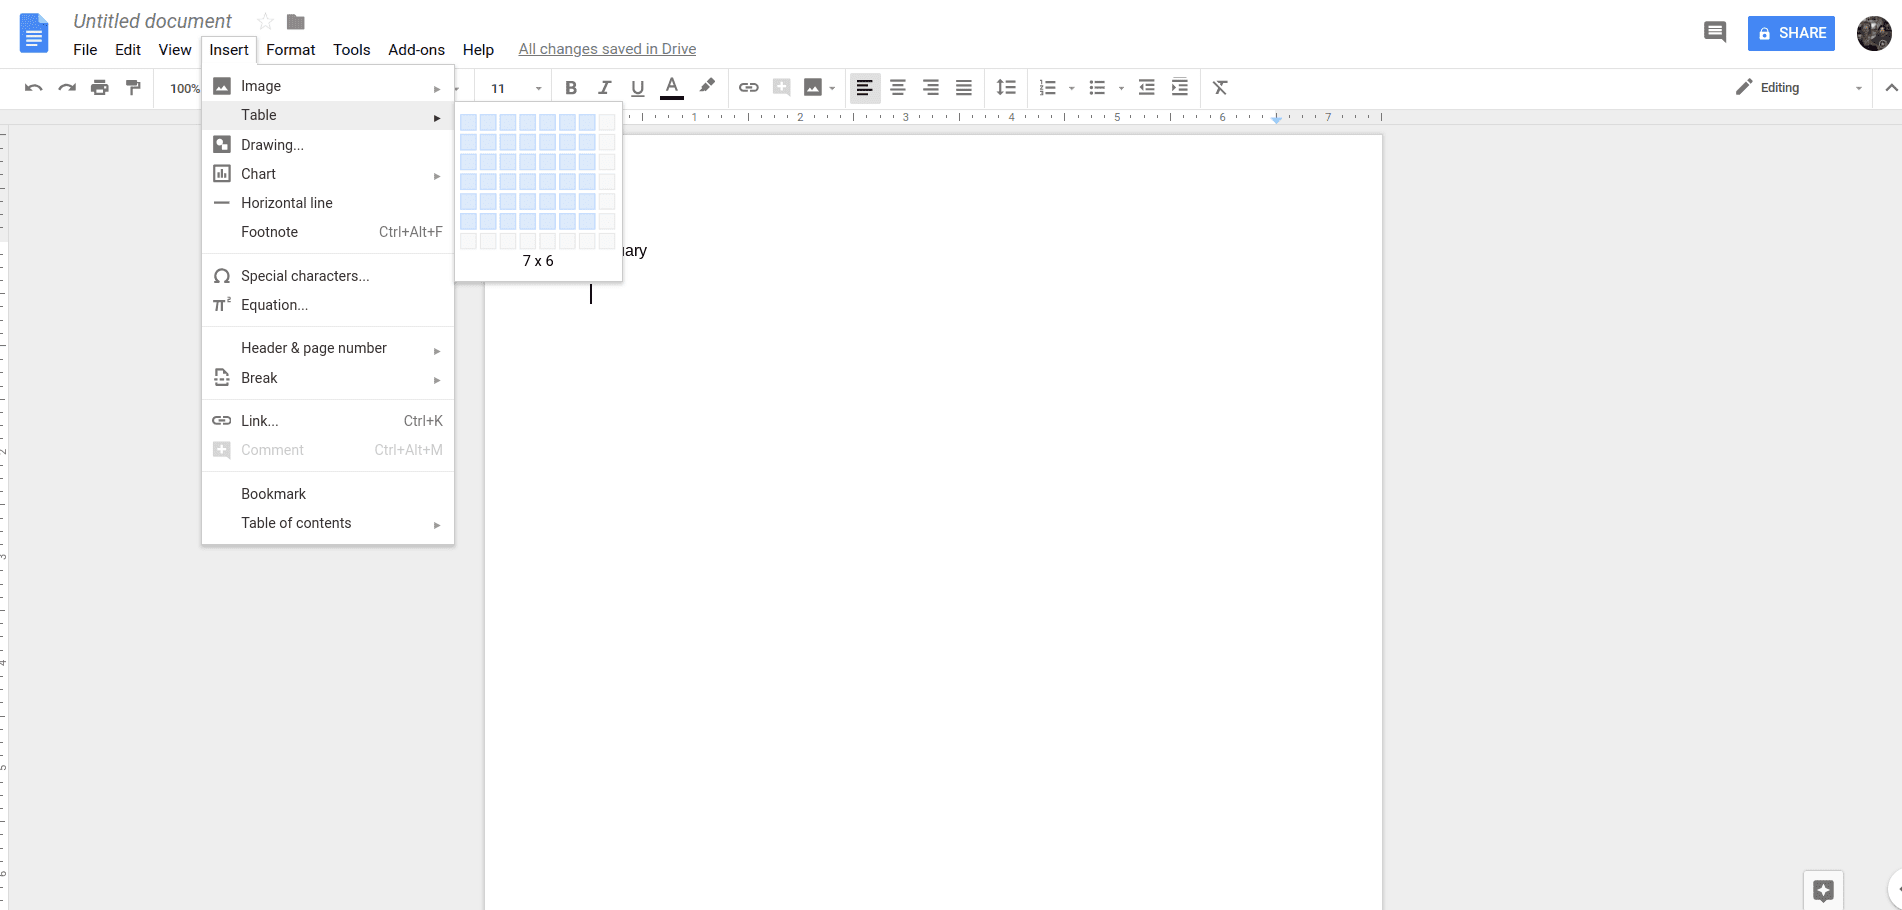 How to Make a Calendar in Google Docs (2023 Guide + Templates)